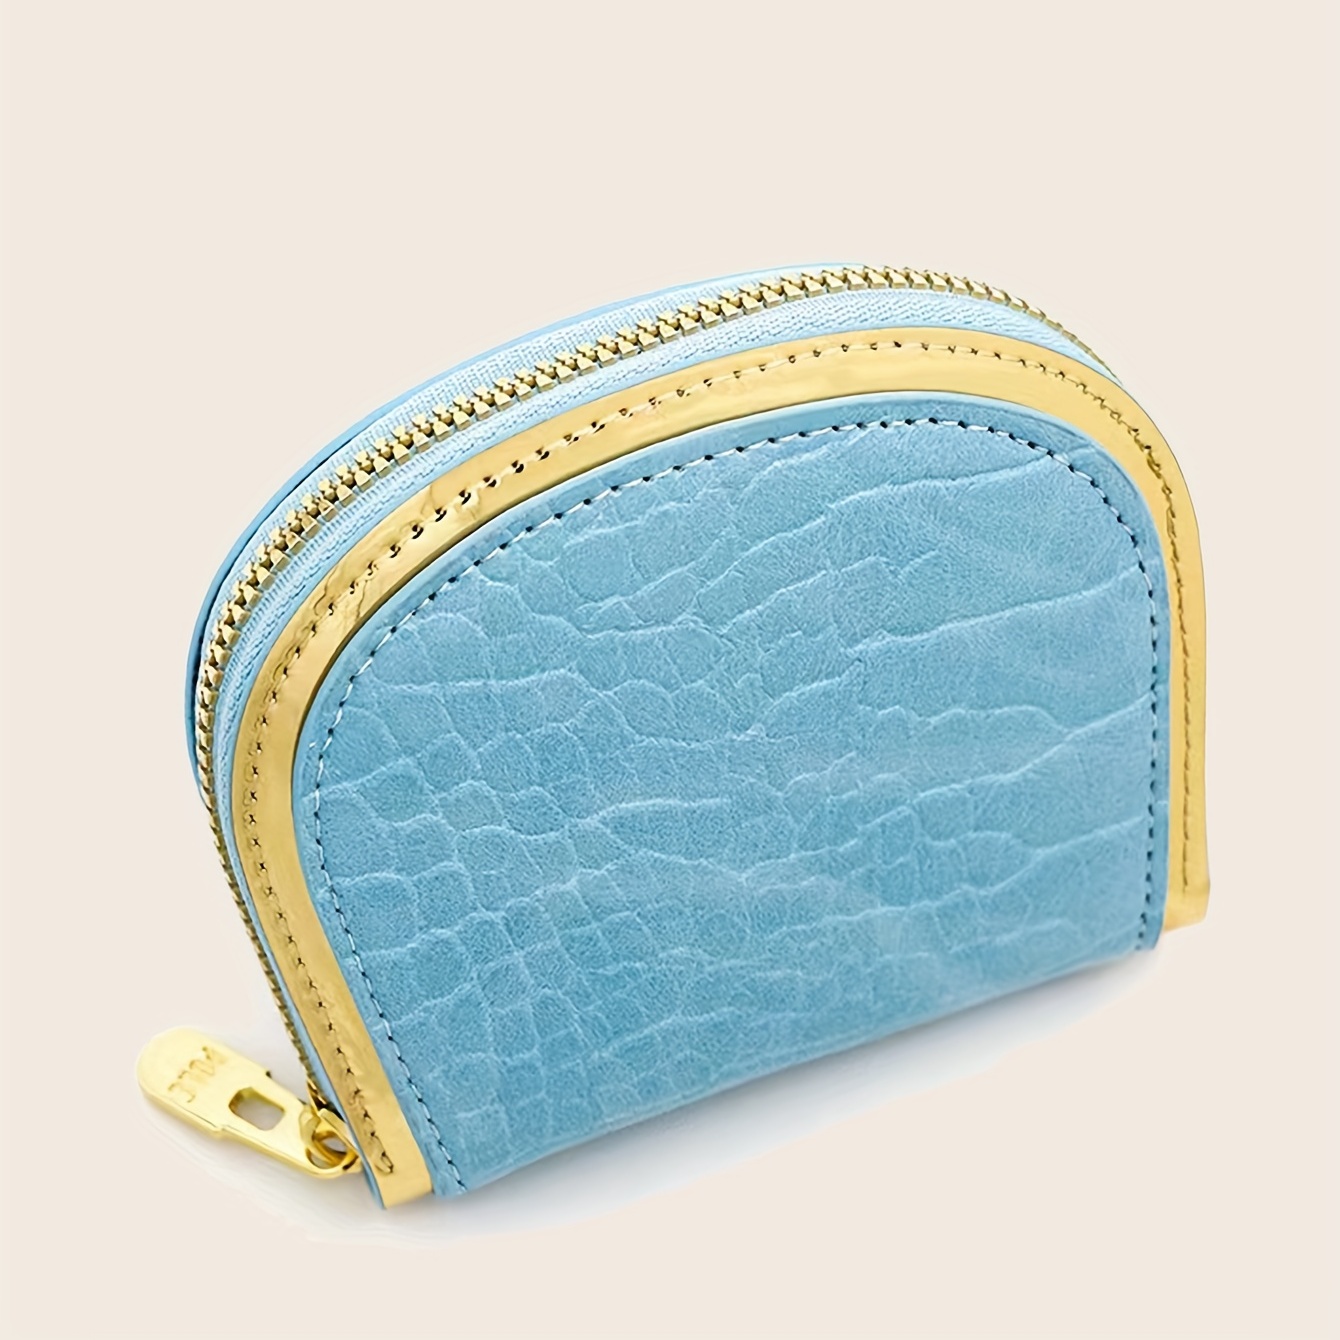 Crocodile Patterned Sky Blue Pu Leather Long Wallet With Multiple Card  Slots, Coin Pocket & Student Id Holder